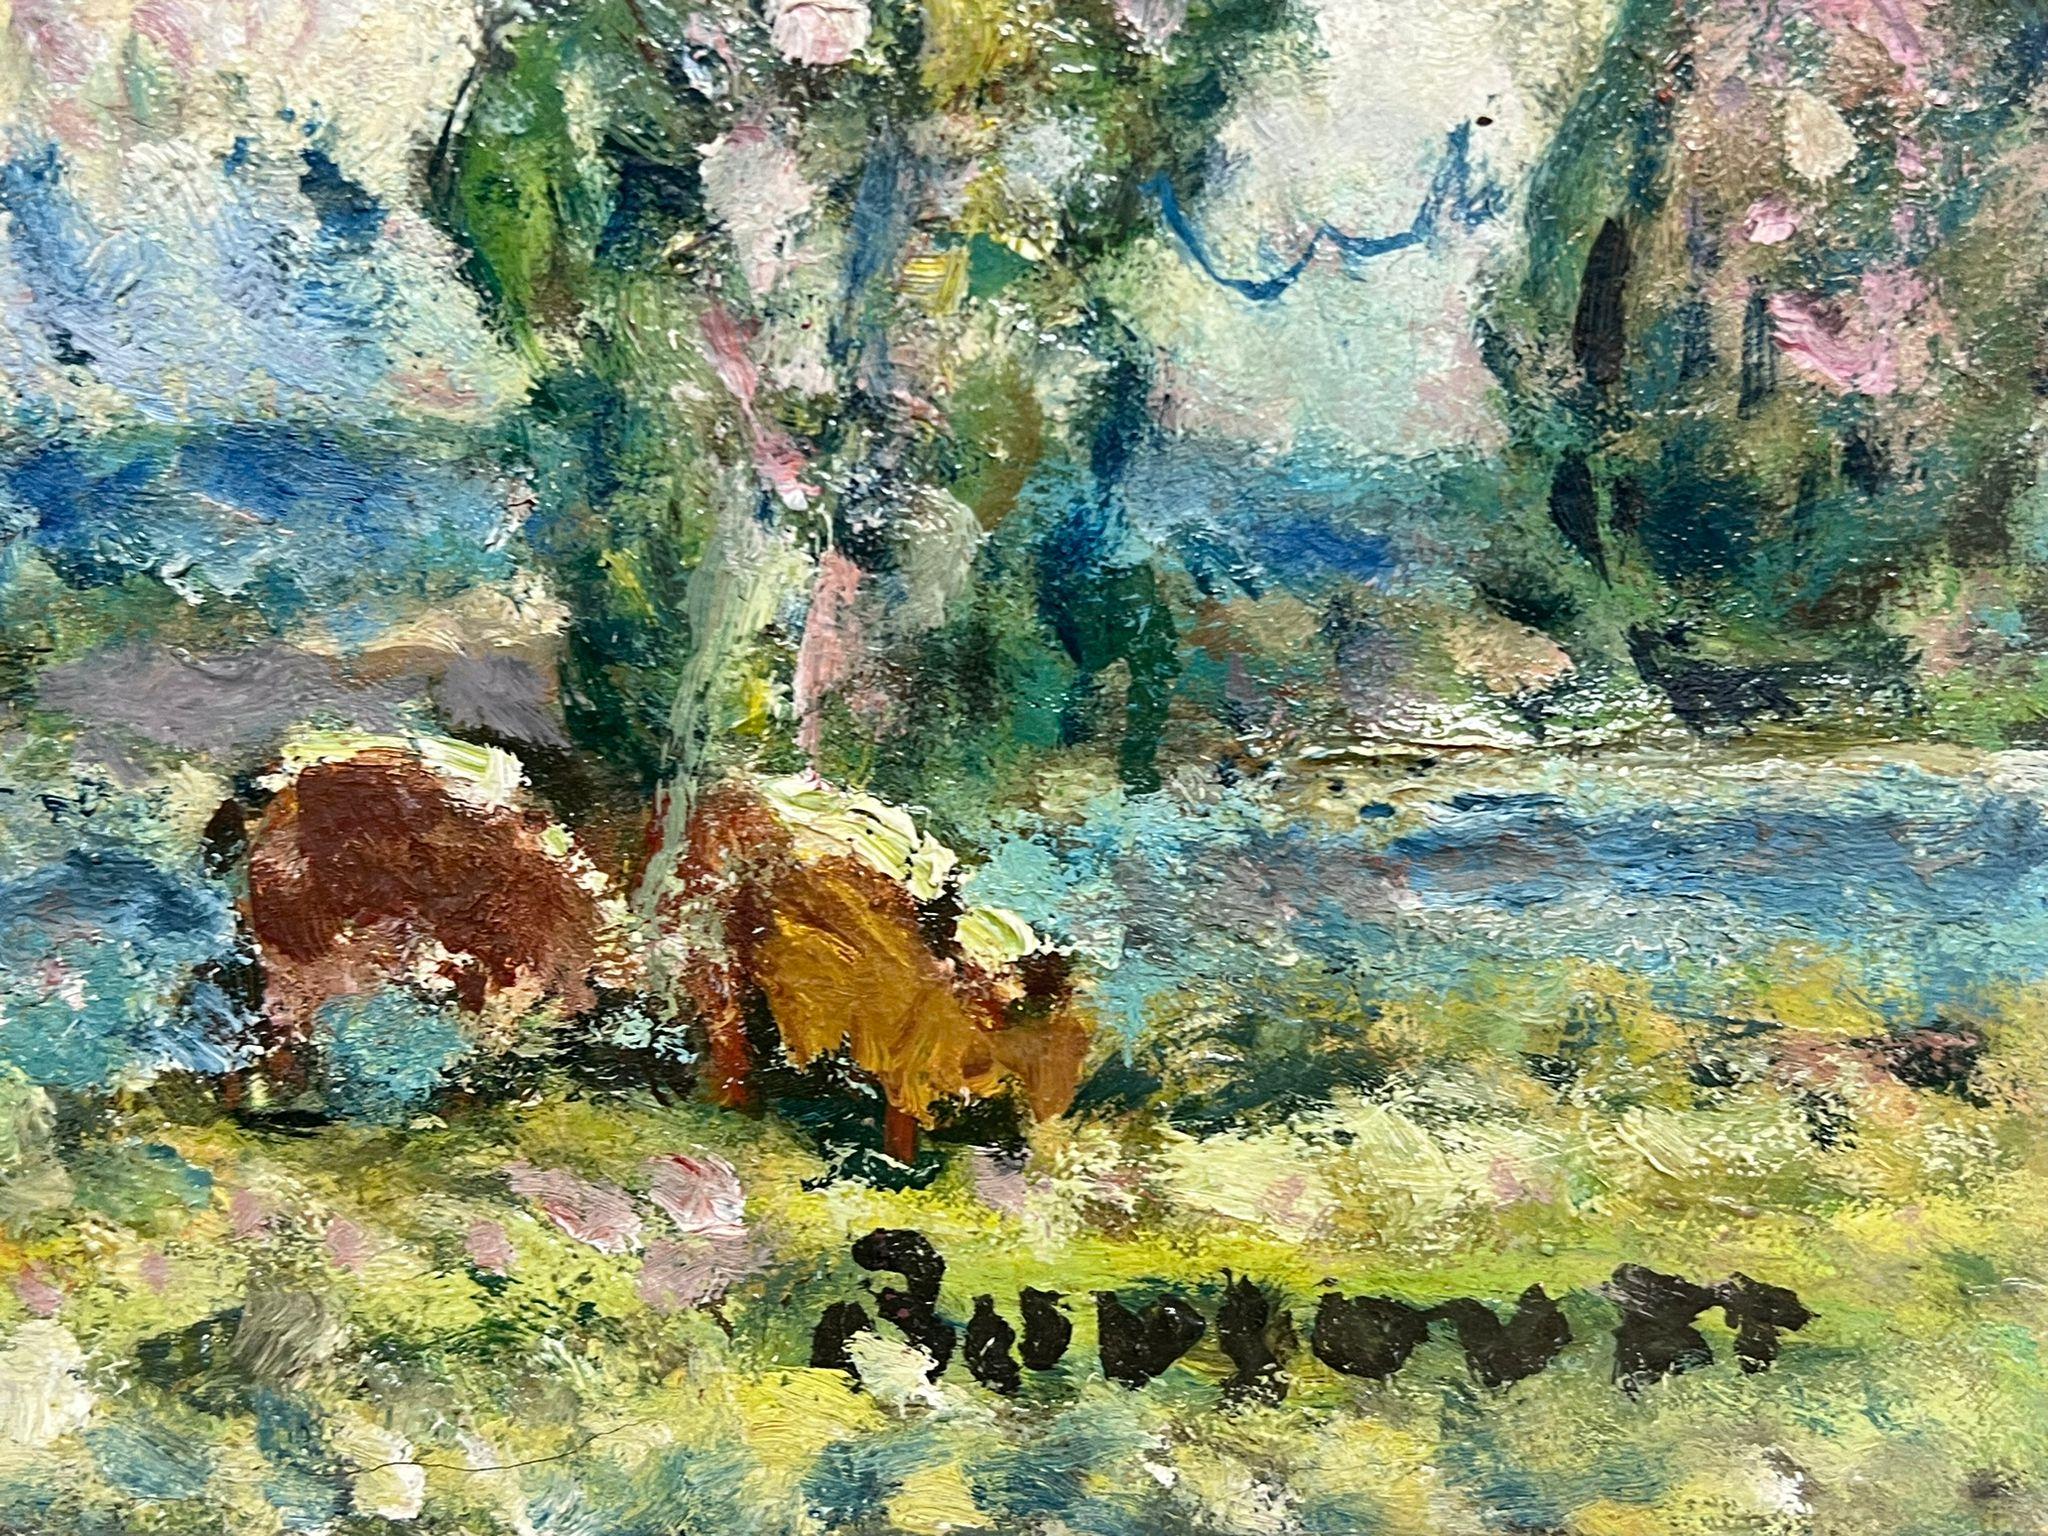 Cattle Grazing
by Georges Bousquait, French 20th century
signed & dated 1963
oil on canvas, unframed 
board: 9 x 11 inches
inscribed verso
provenance: private collection, France
condition: very good and sound condition